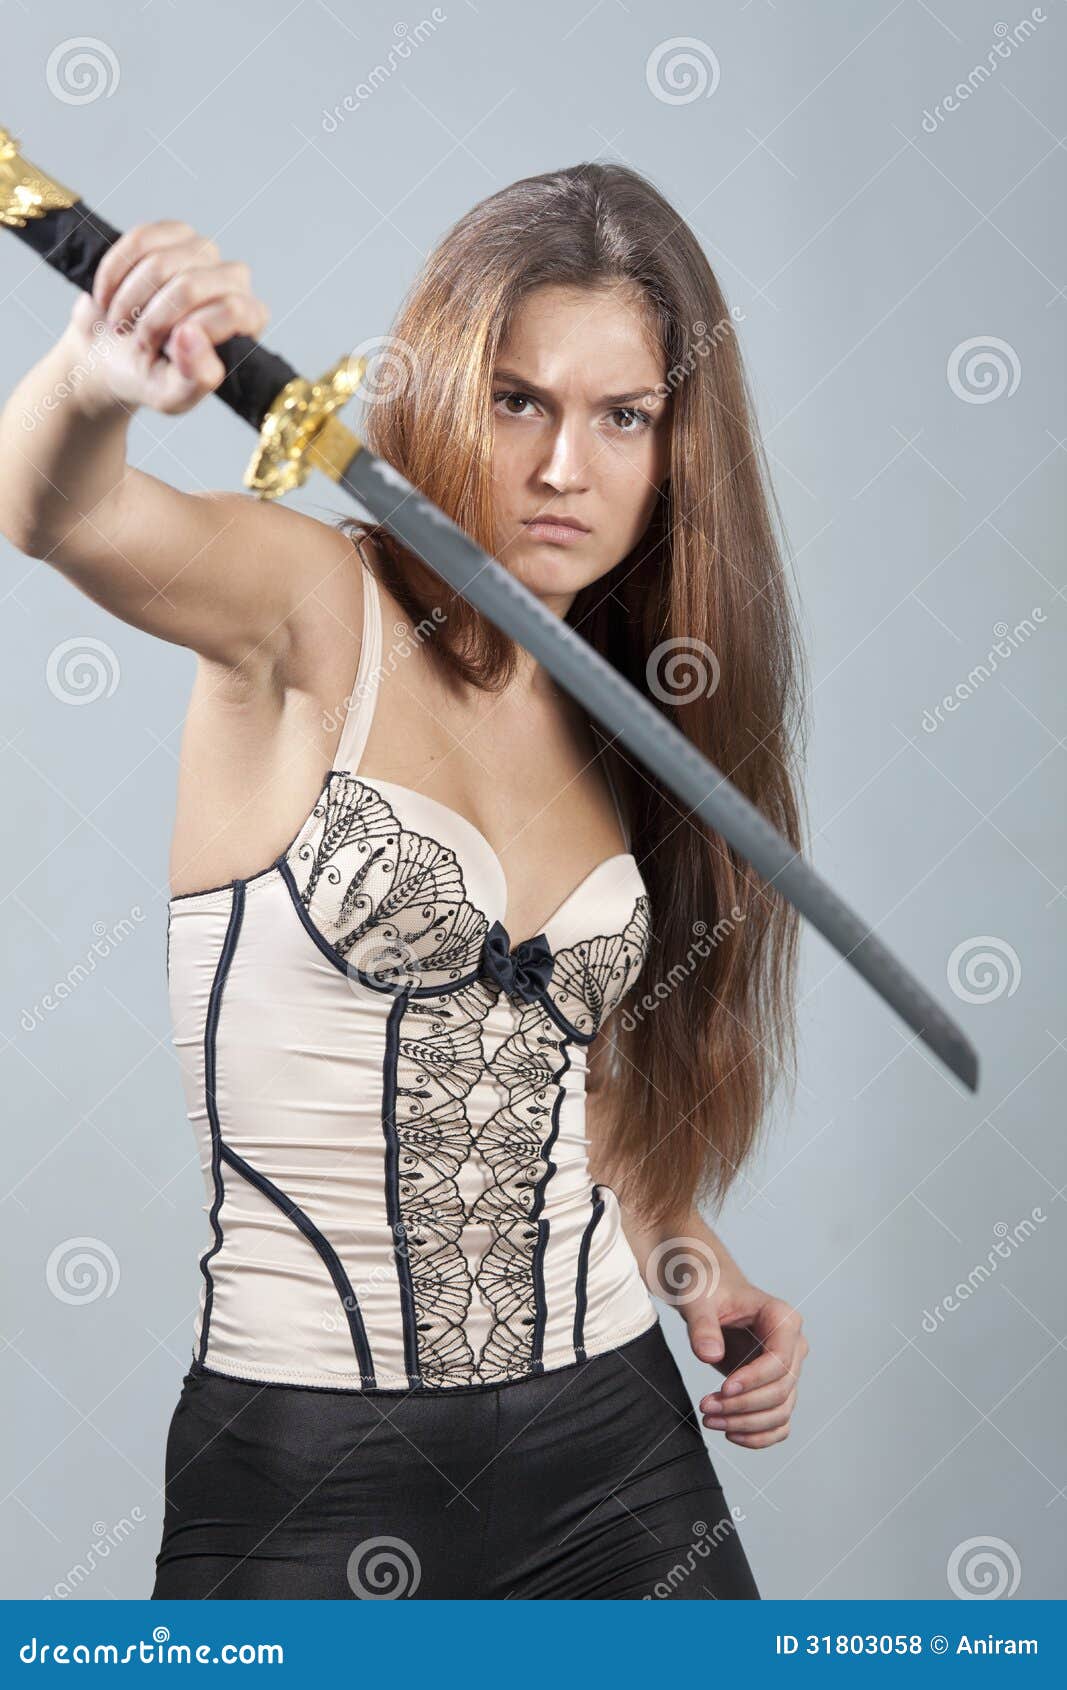 Pretty Girl With Sword Posing Over Dark Background Stock Photo, Picture and  Royalty Free Image. Image 40760145.